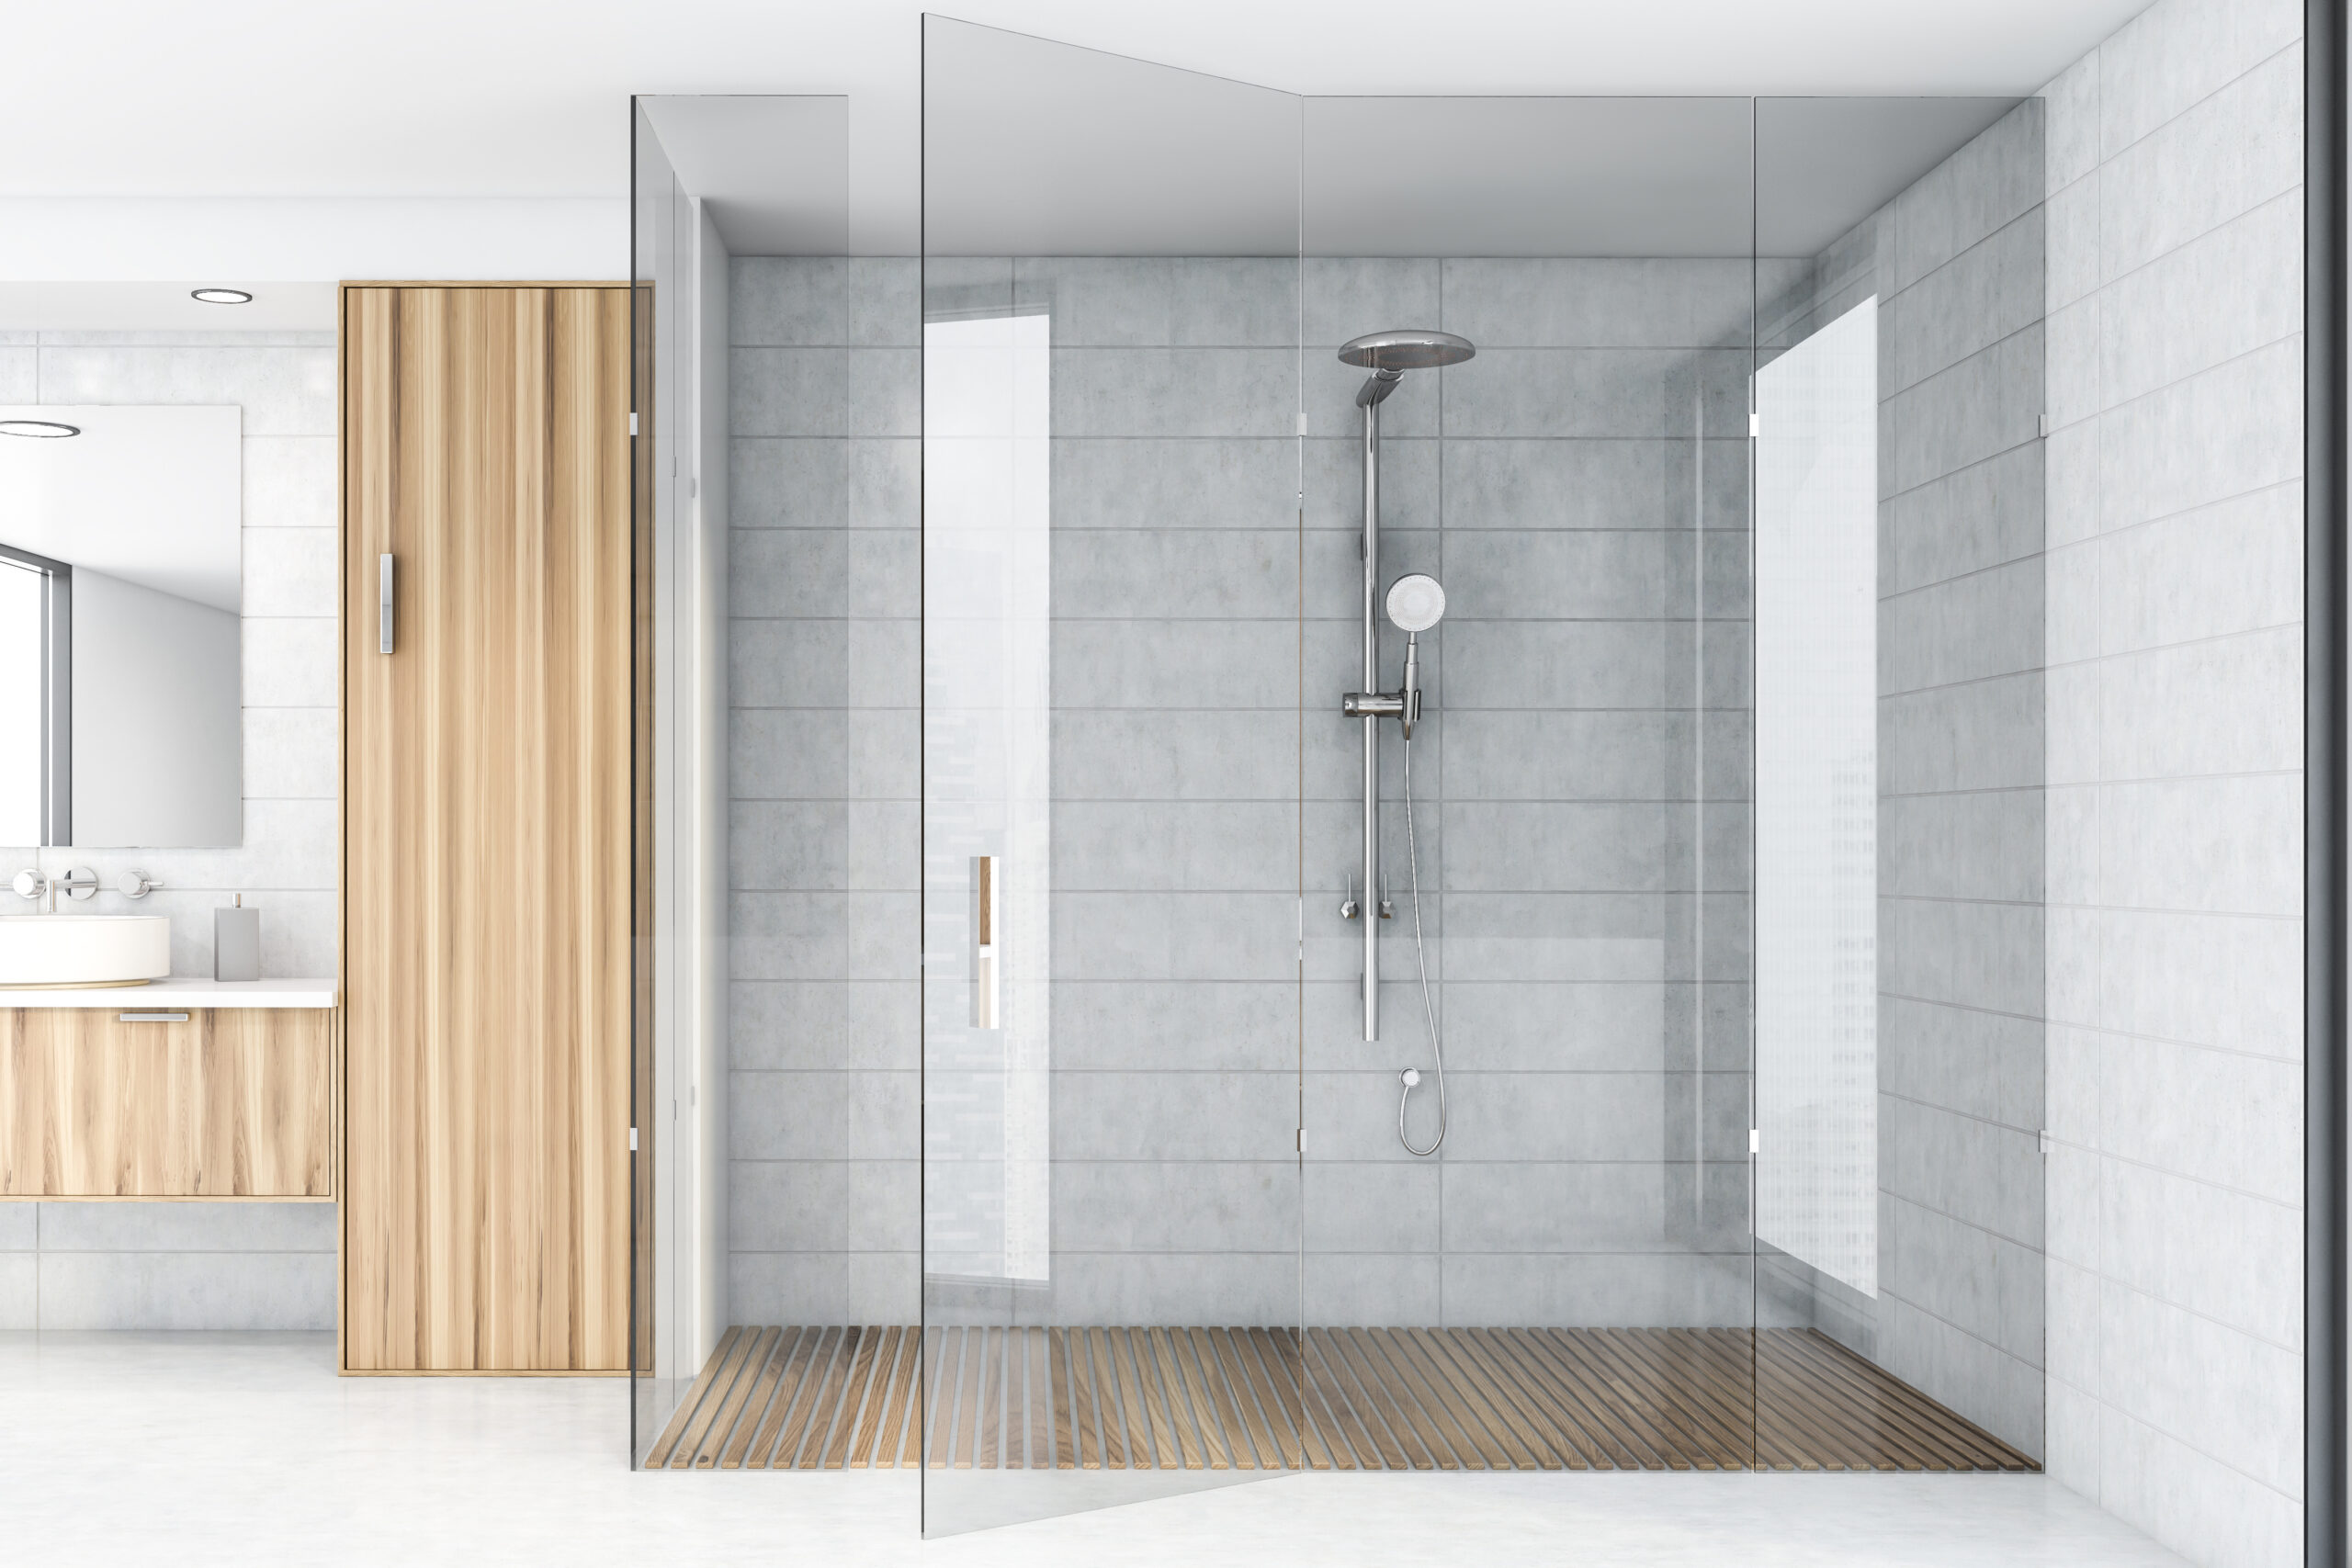 Spacious walk-in shower with glass enclosure